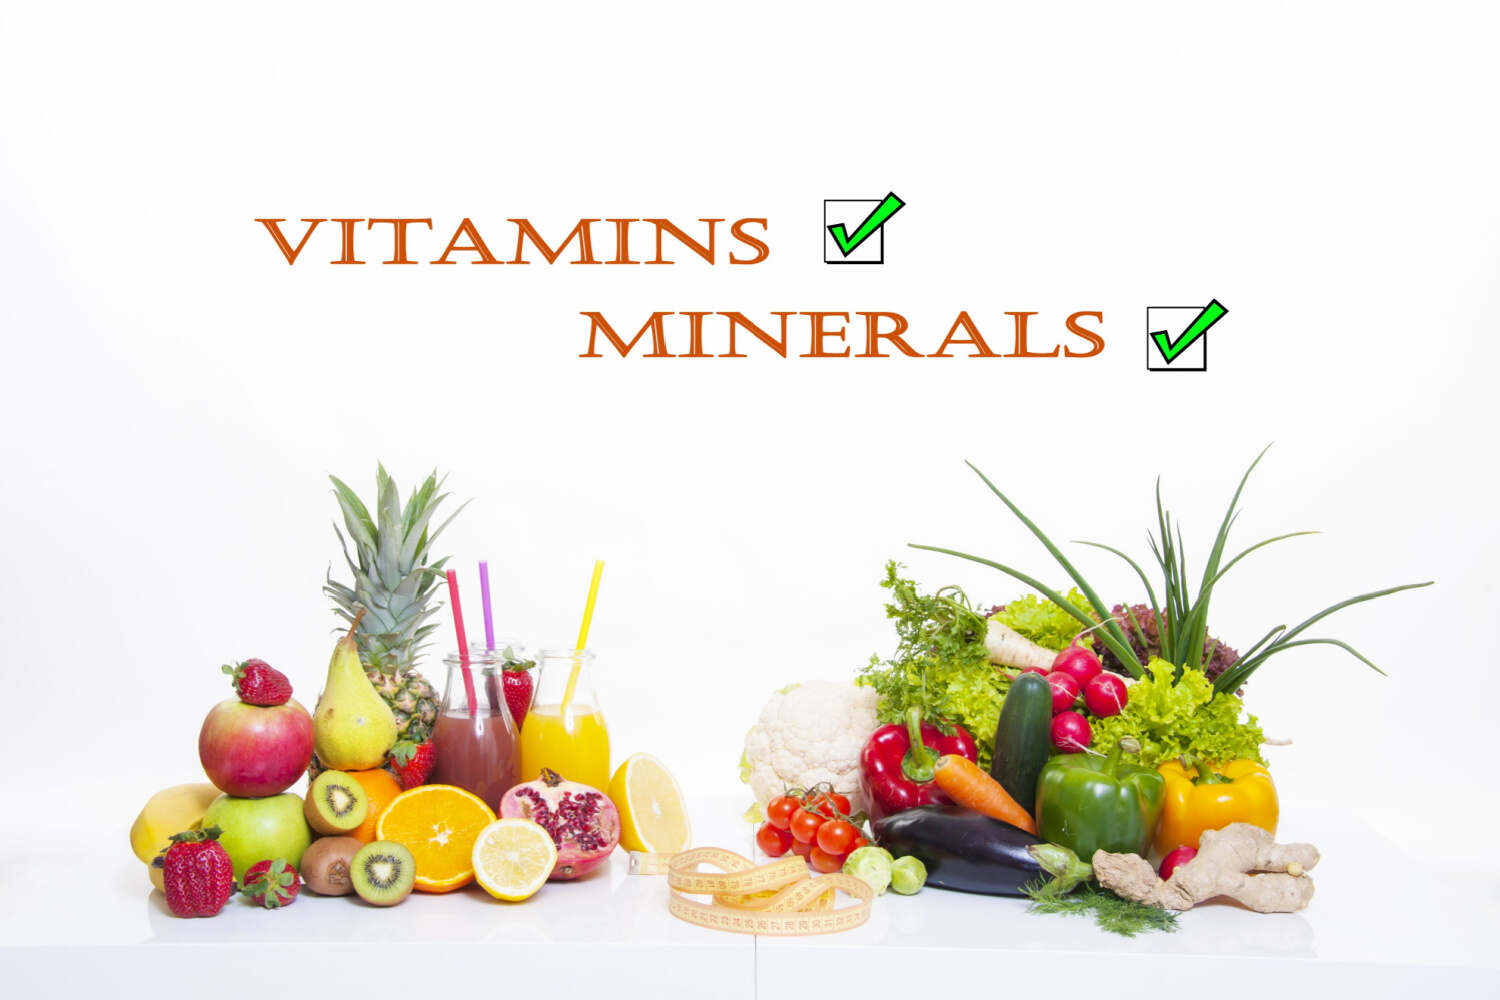 Vitamins and minerals are important for growing kids